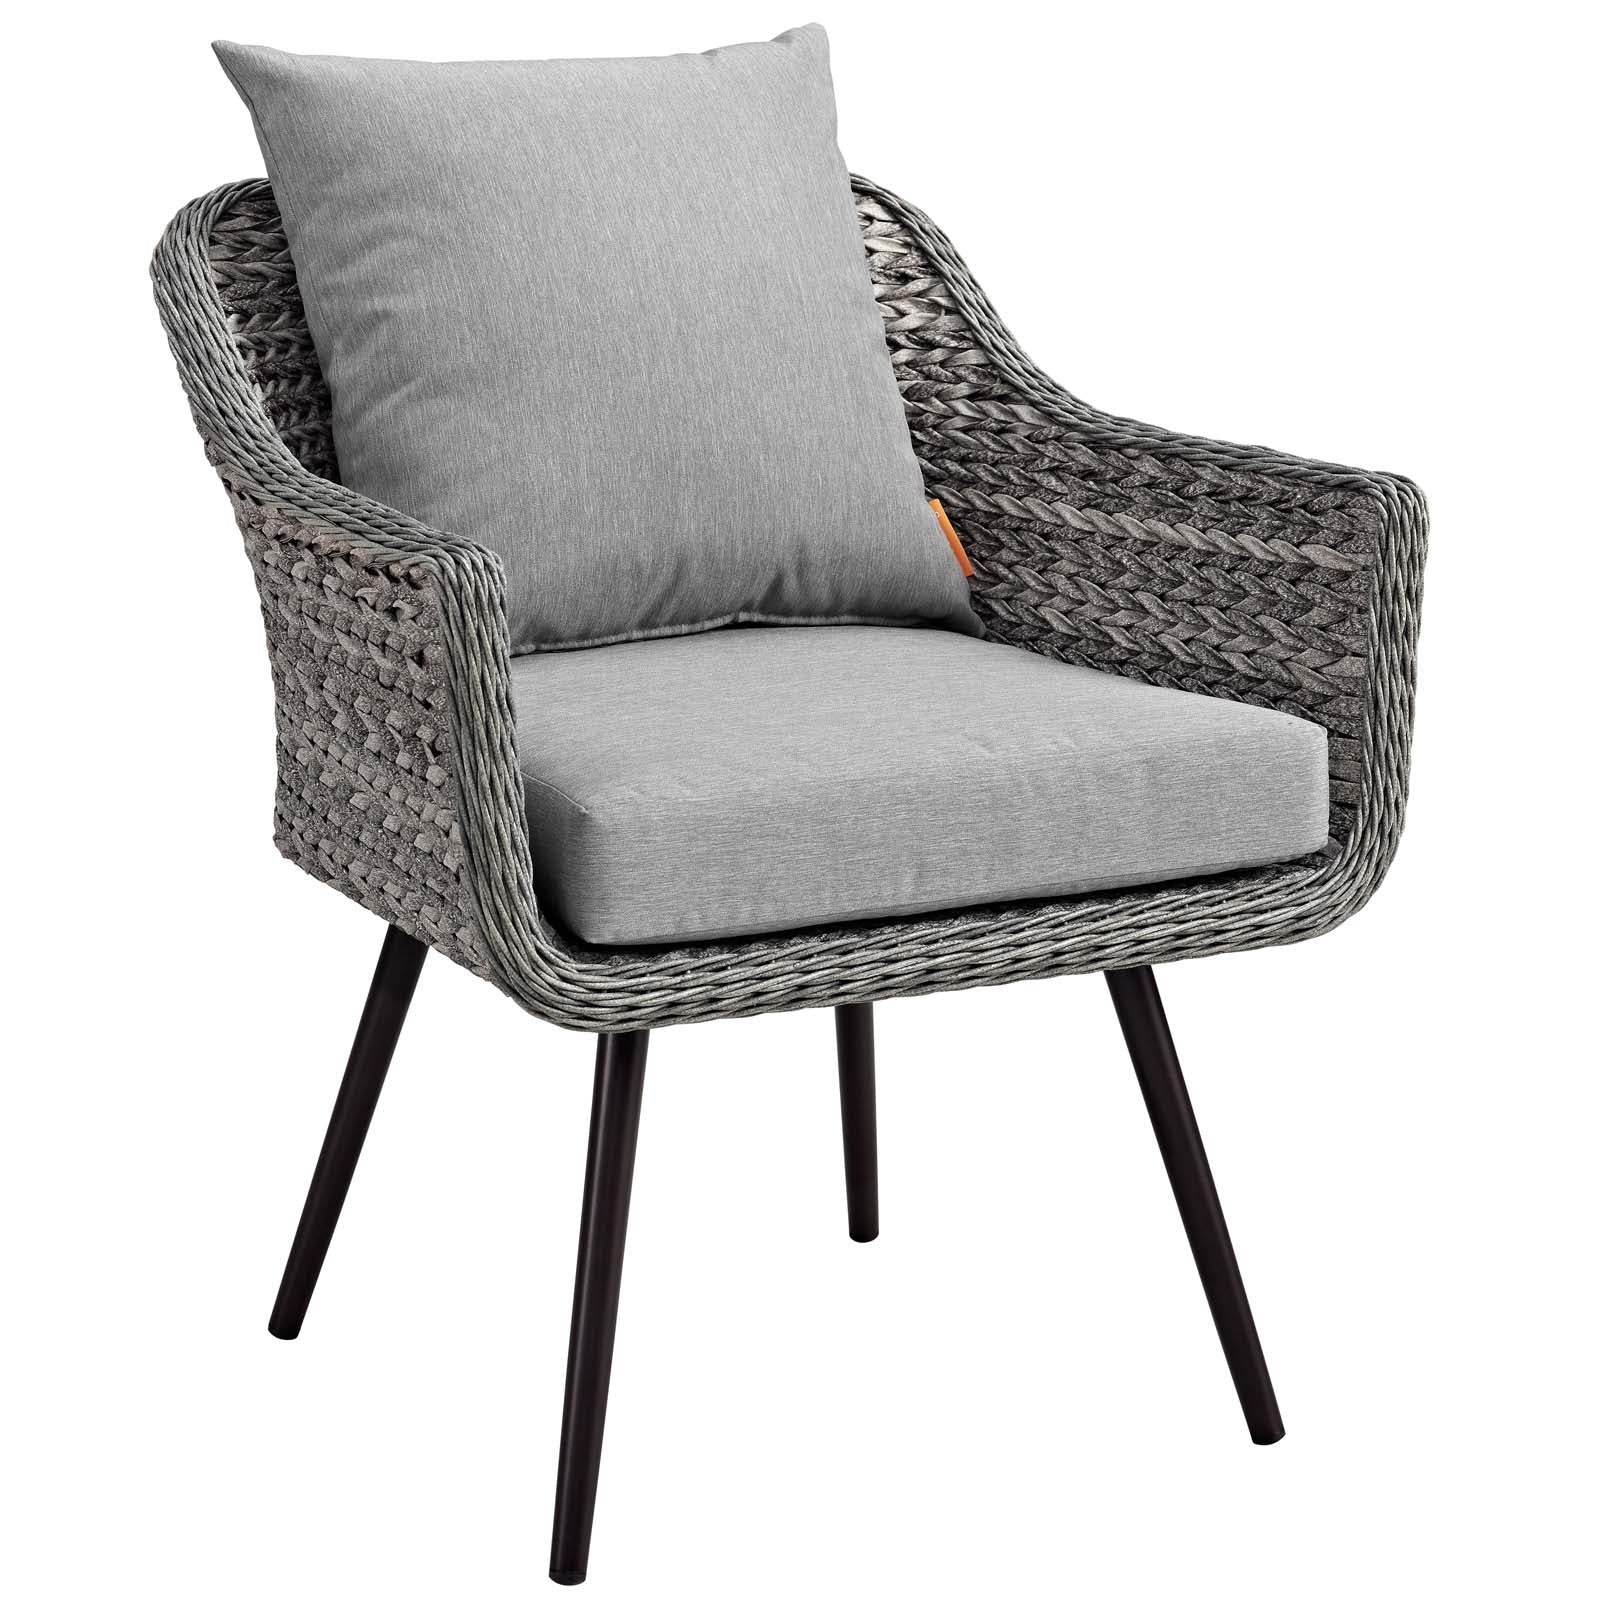 Endeavor 3 Piece Outdoor Patio Wicker Rattan Armchair and Coffee Table Set - East Shore Modern Home Furnishings